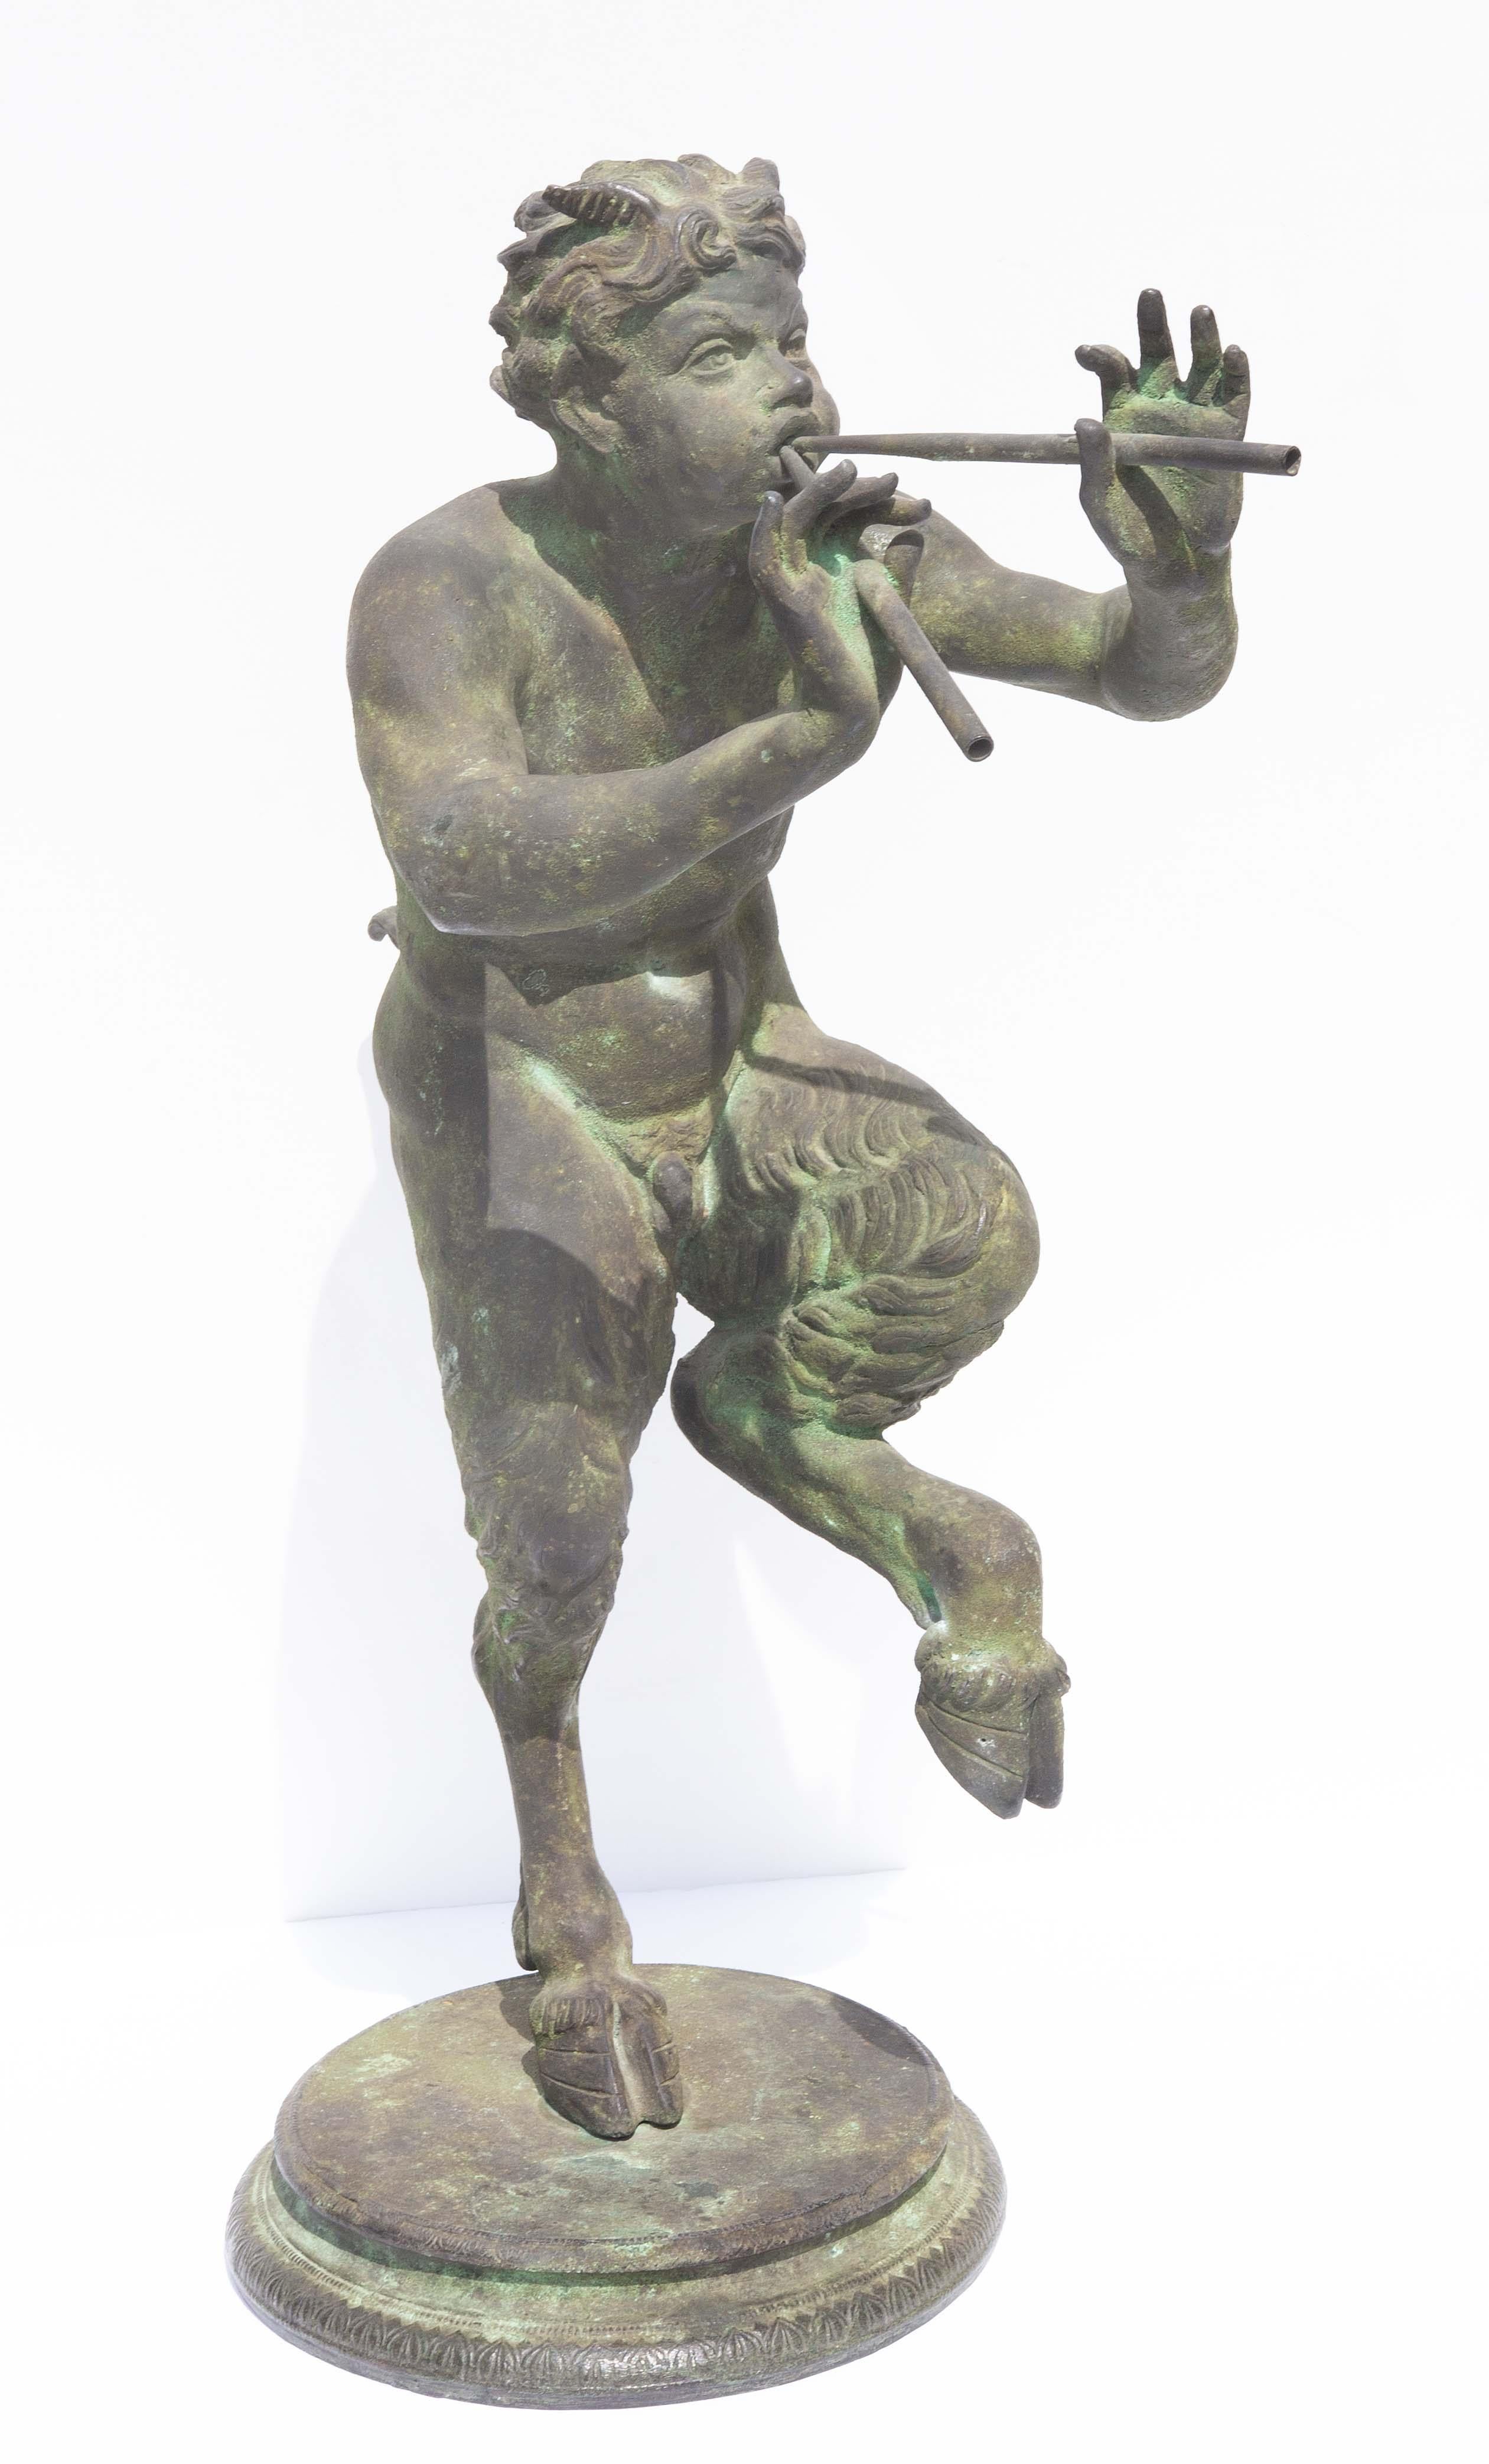 Grand tour bronze of Pan. Italian. Verdigris patina. In Classical Mythology, Pan is the original bad boy. He watches over flocks, forests, mountains, and all wild things. He shares this aspect with Apollo. But, also, with Apollo, he shares a taste